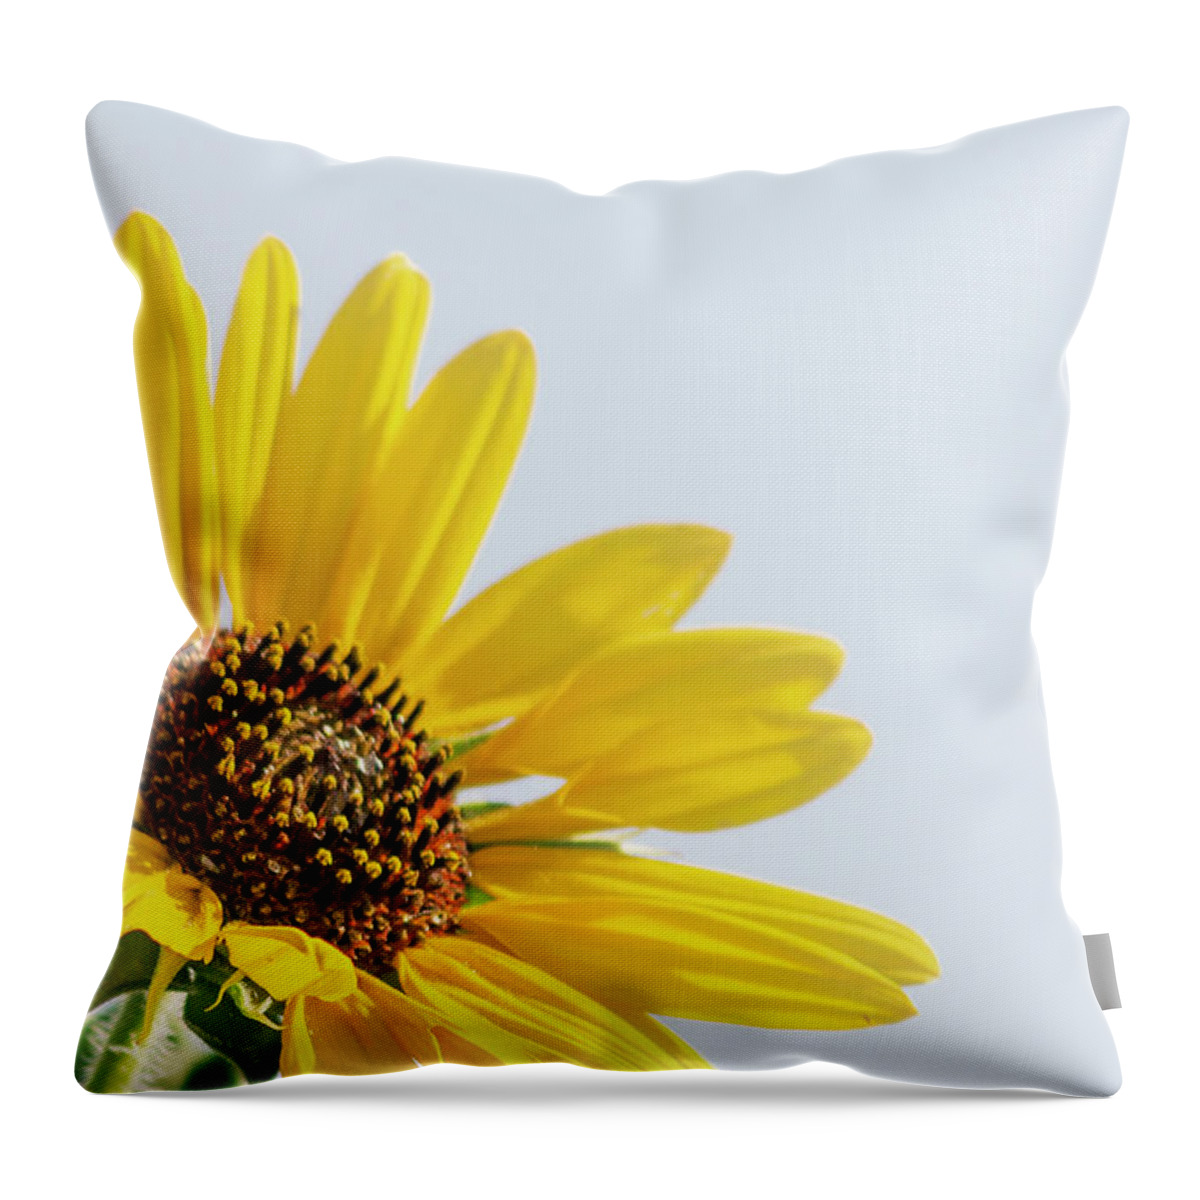 Beautiful Throw Pillow featuring the digital art Sunflowers #1 by Brad Thornton